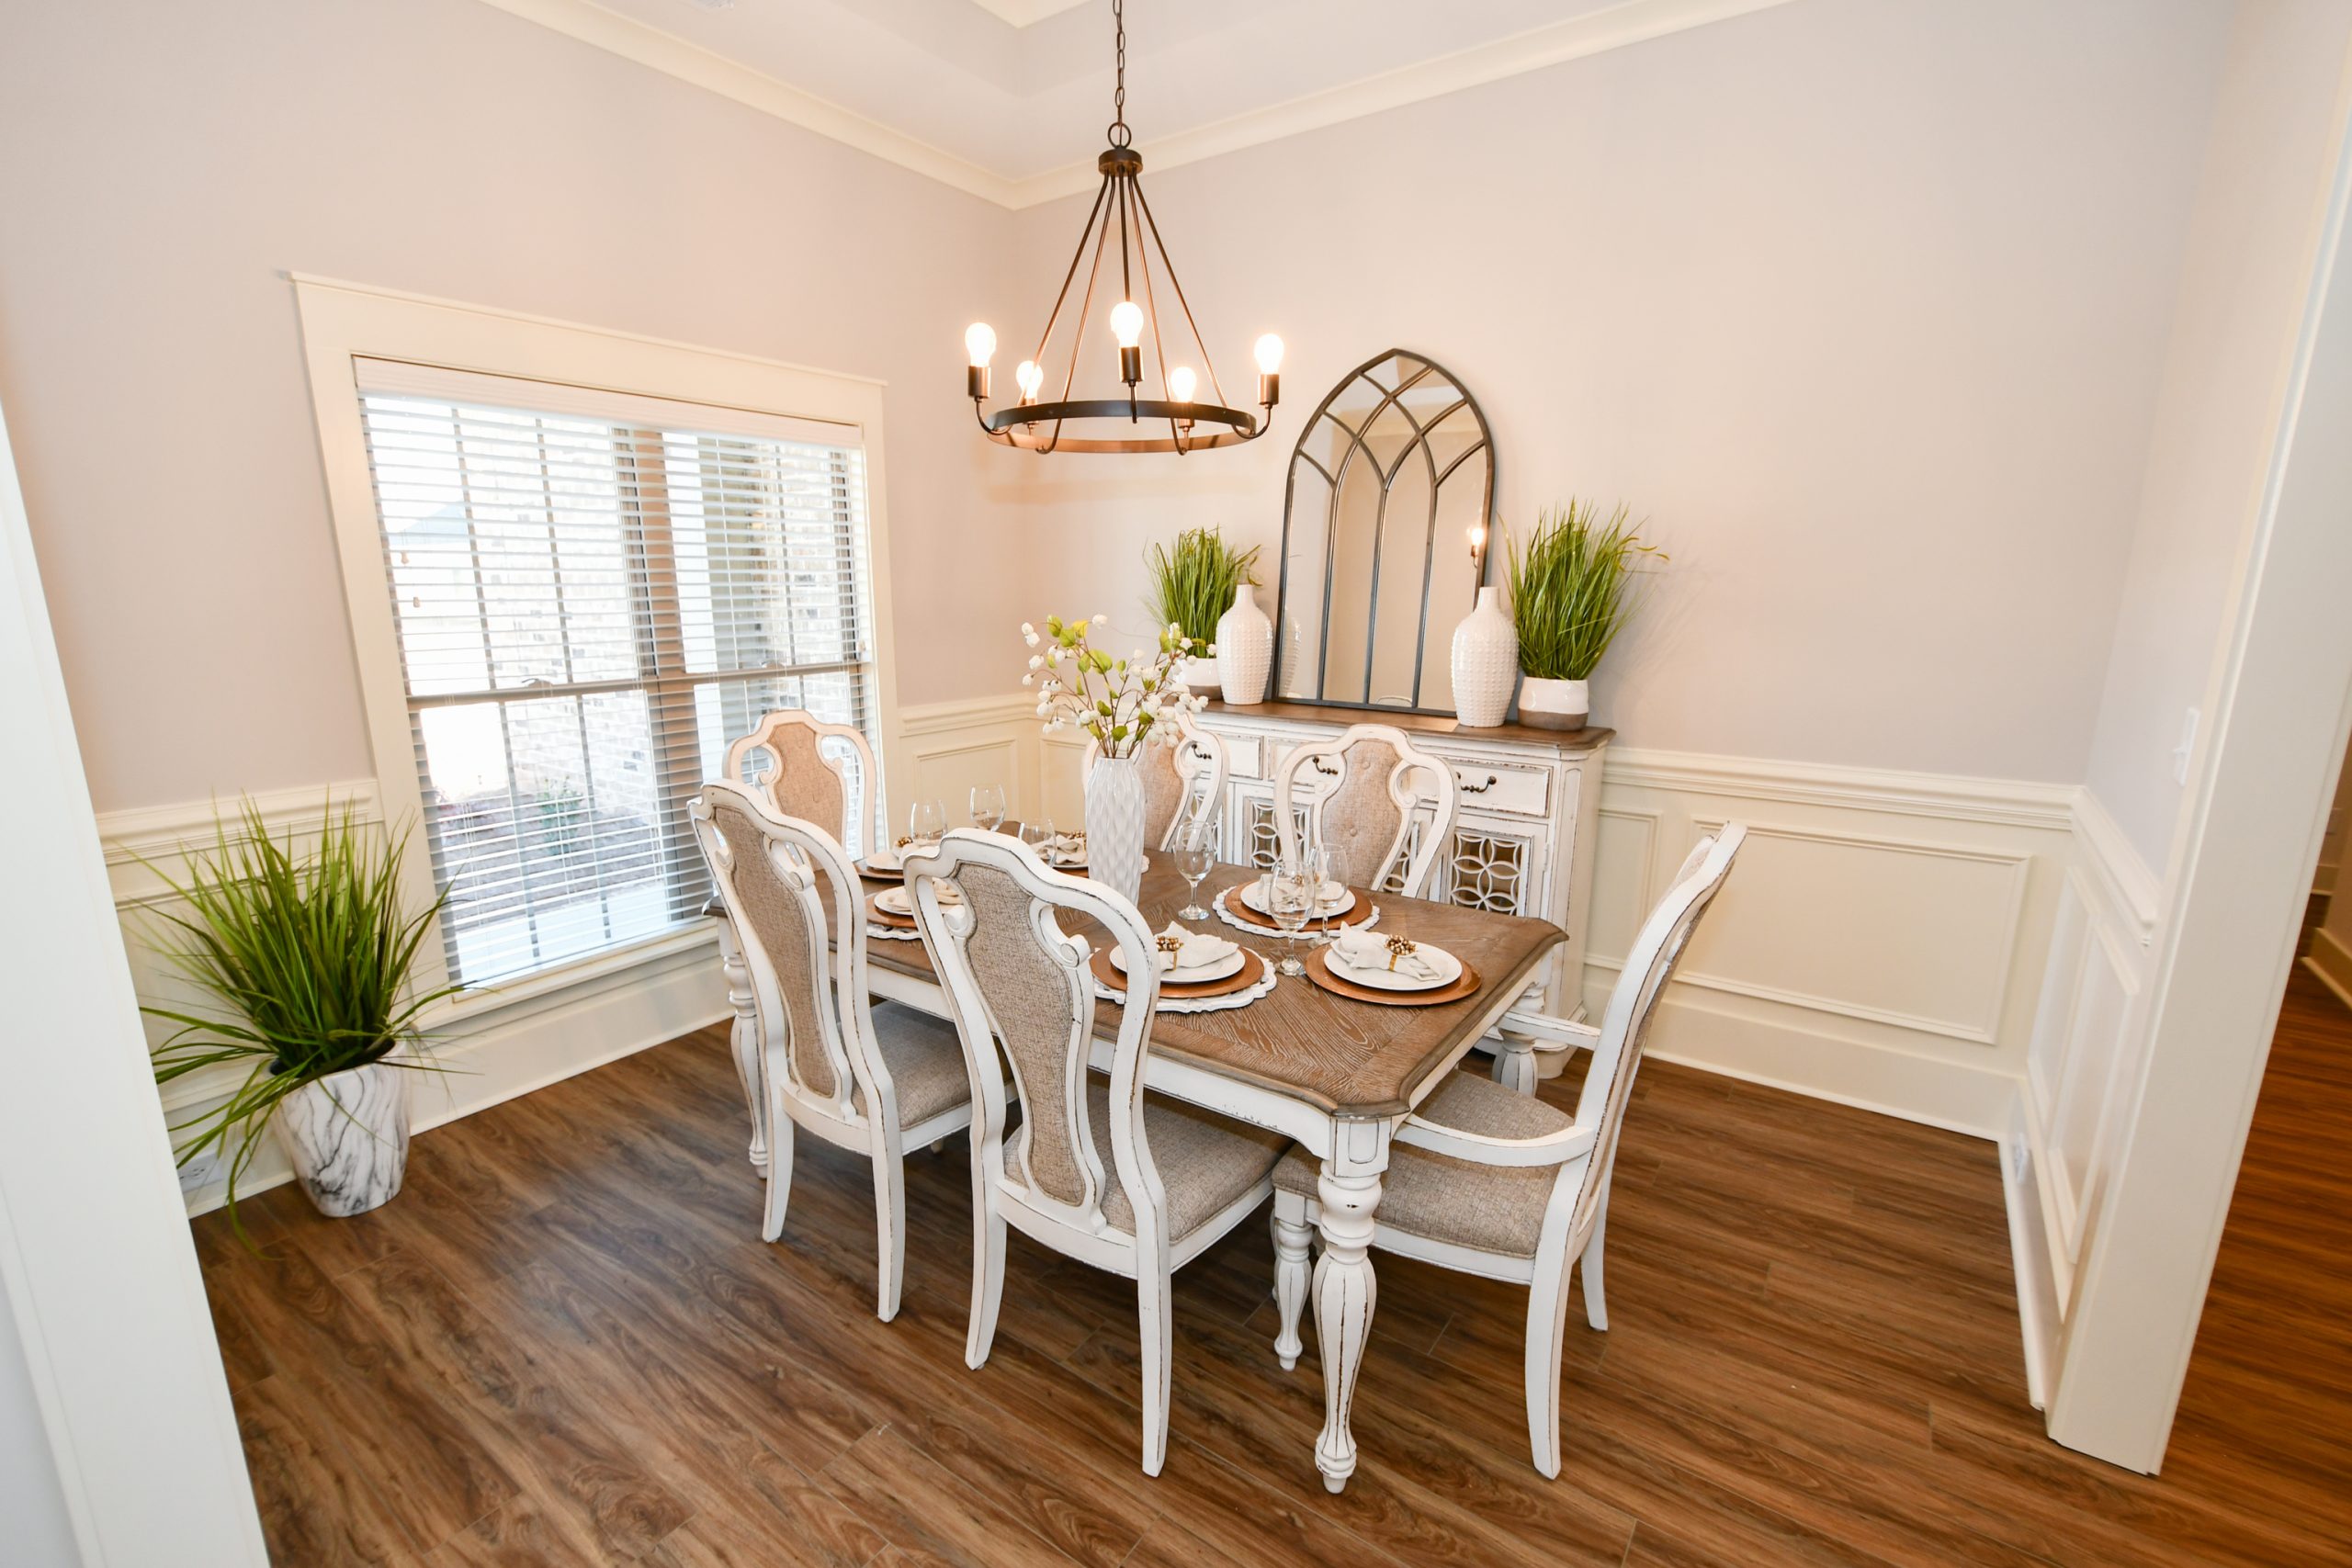 112 Woodinds Ct – Formal Dining Room